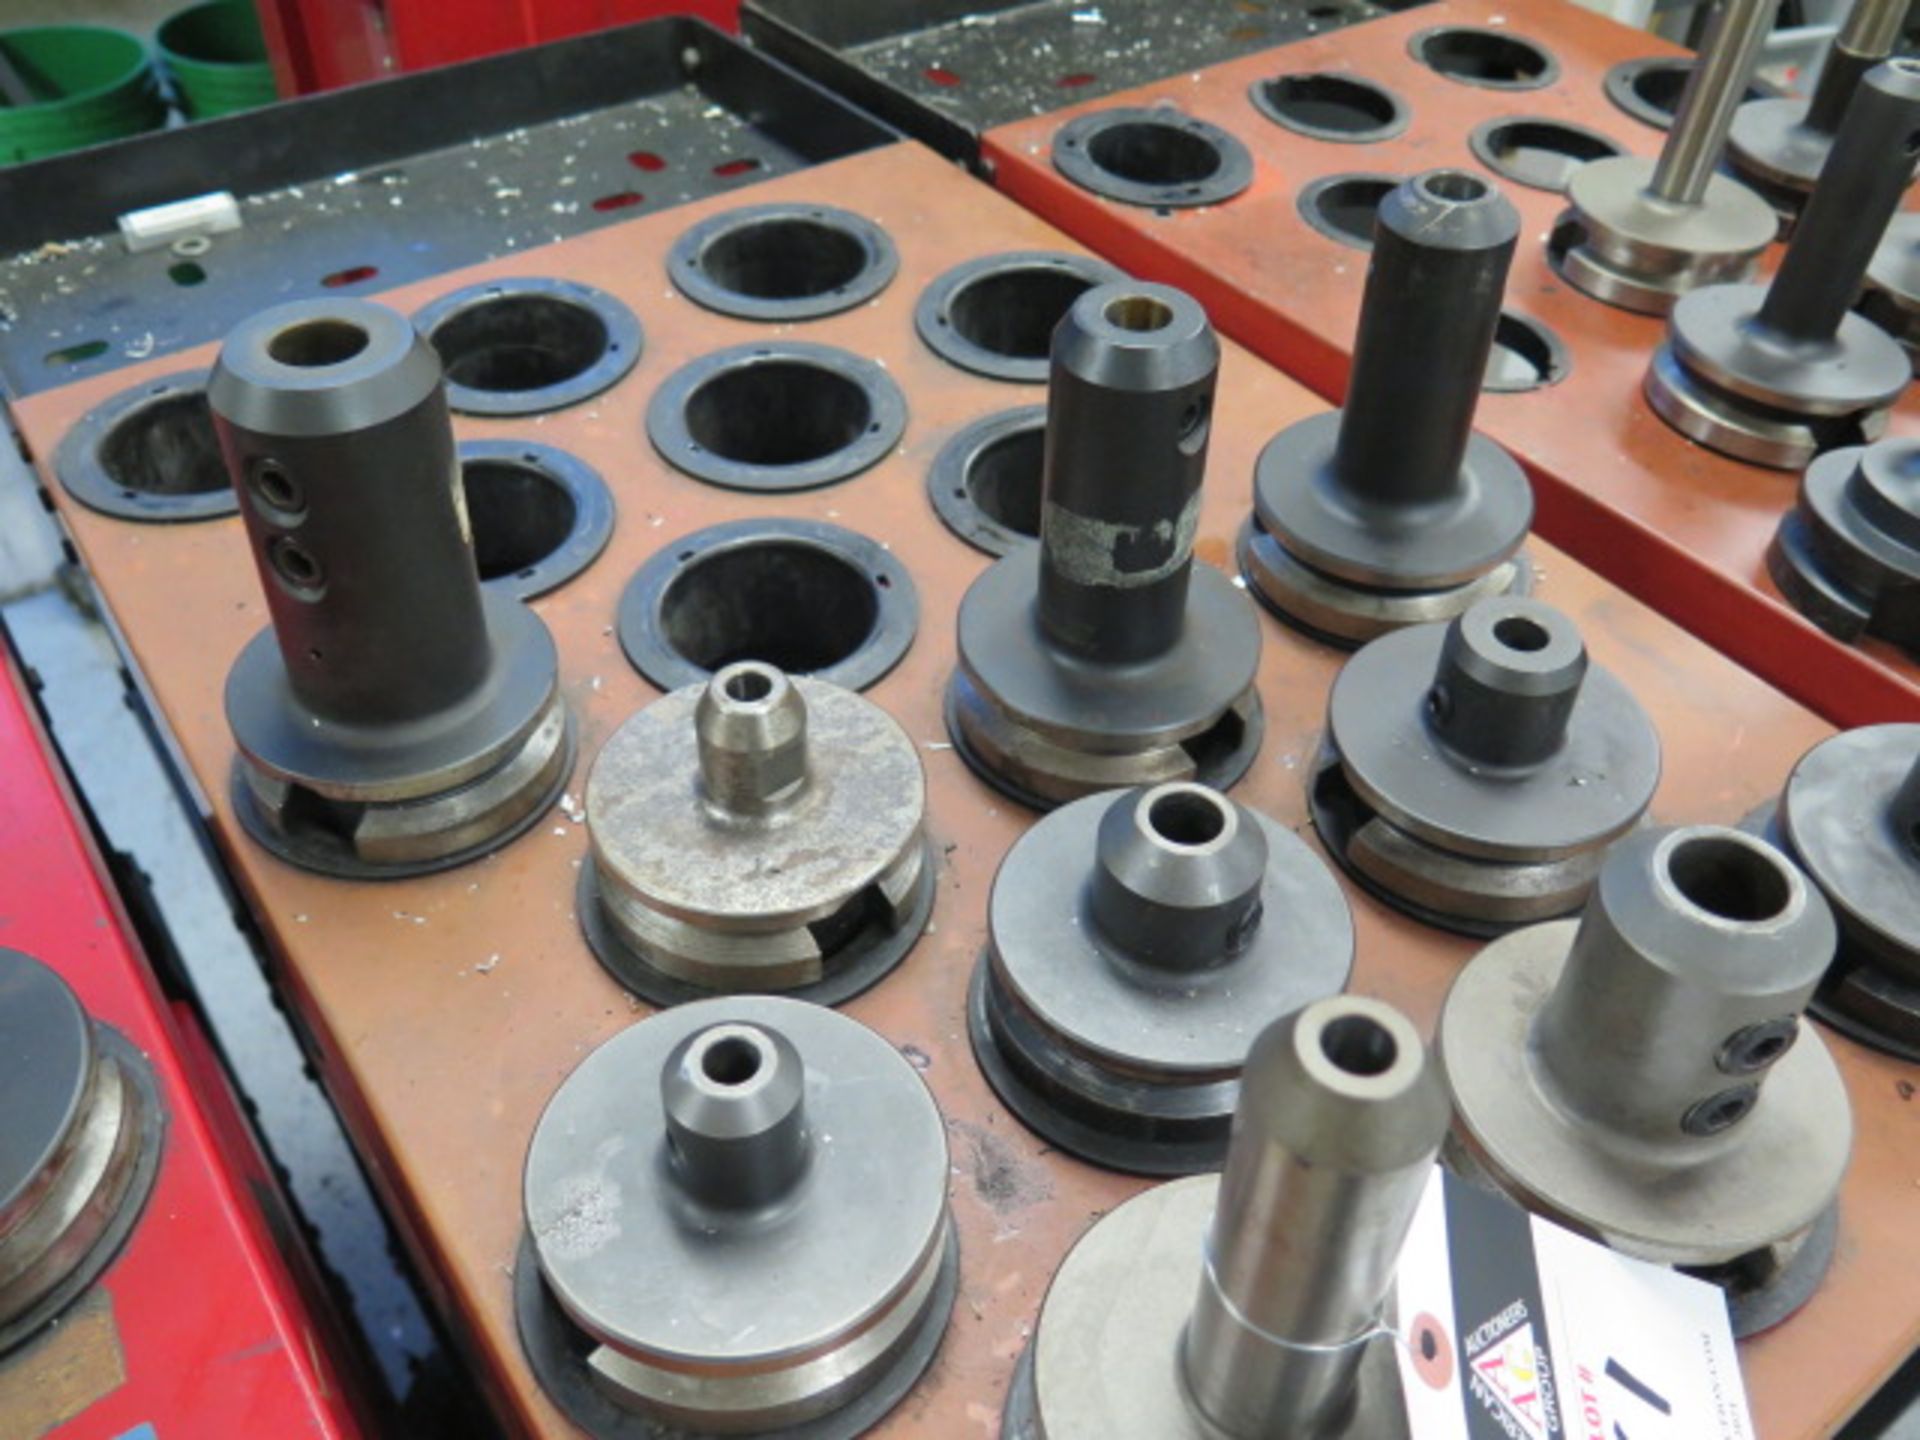 BT-50 Taper Tooling (10) (SOLD AS-IS - NO WARRANTY) (Located @ 2229 Ringwood Ave. San Jose) - Image 3 of 5